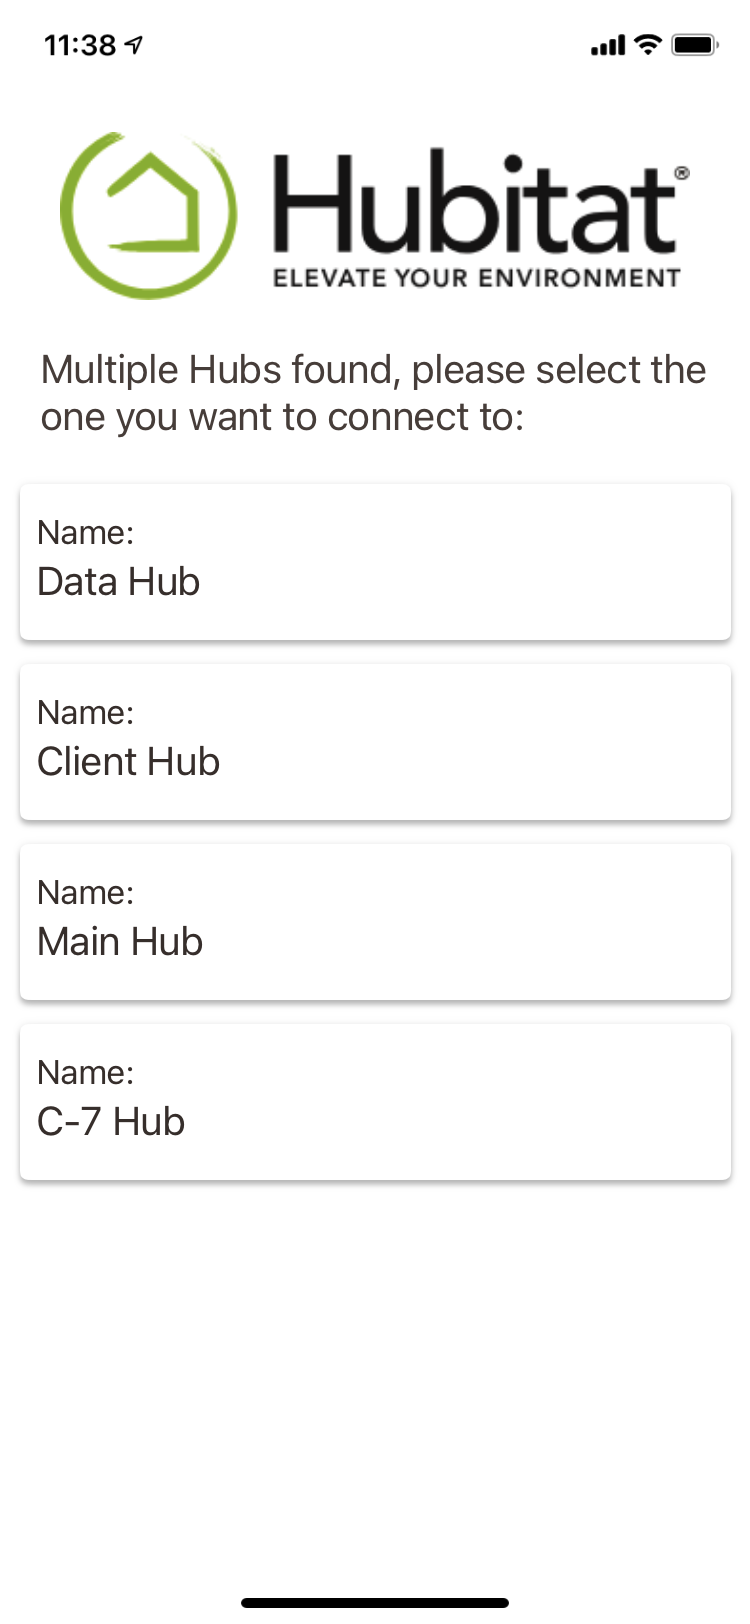 Screenshot of "Multuple hubs found. Please select the one you want to connect to" in the Hubitat mobile aoo